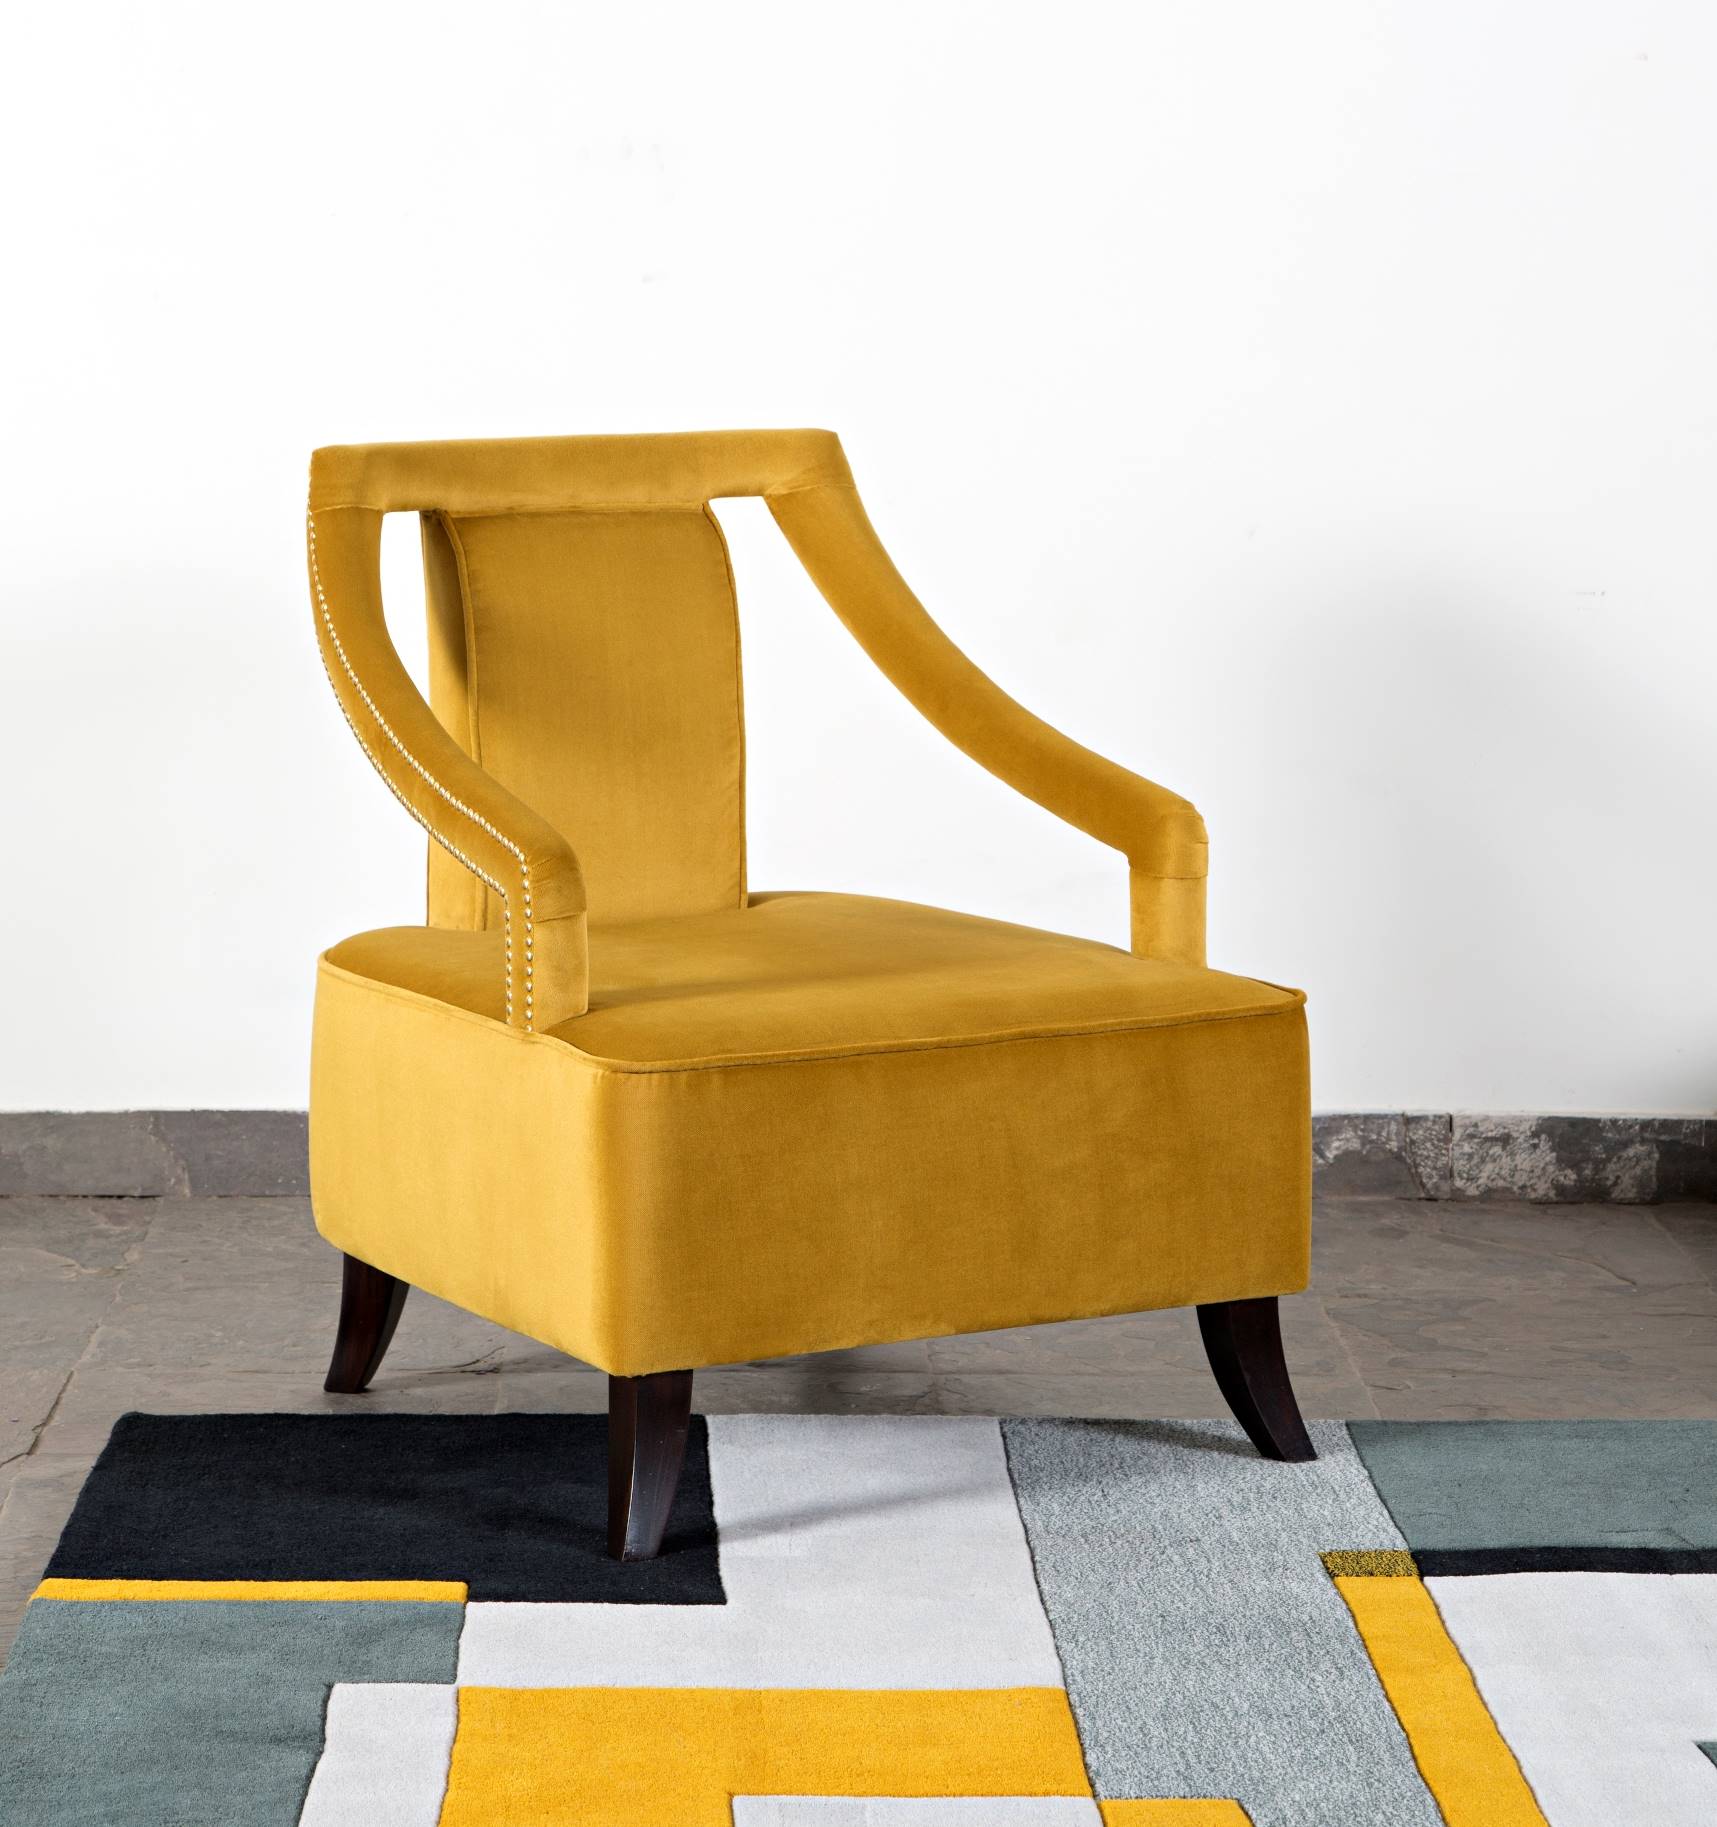 Gamboge chair available at Interior Designer Punam Kalra, Creative Director of I'm the Centre for Applied Arts